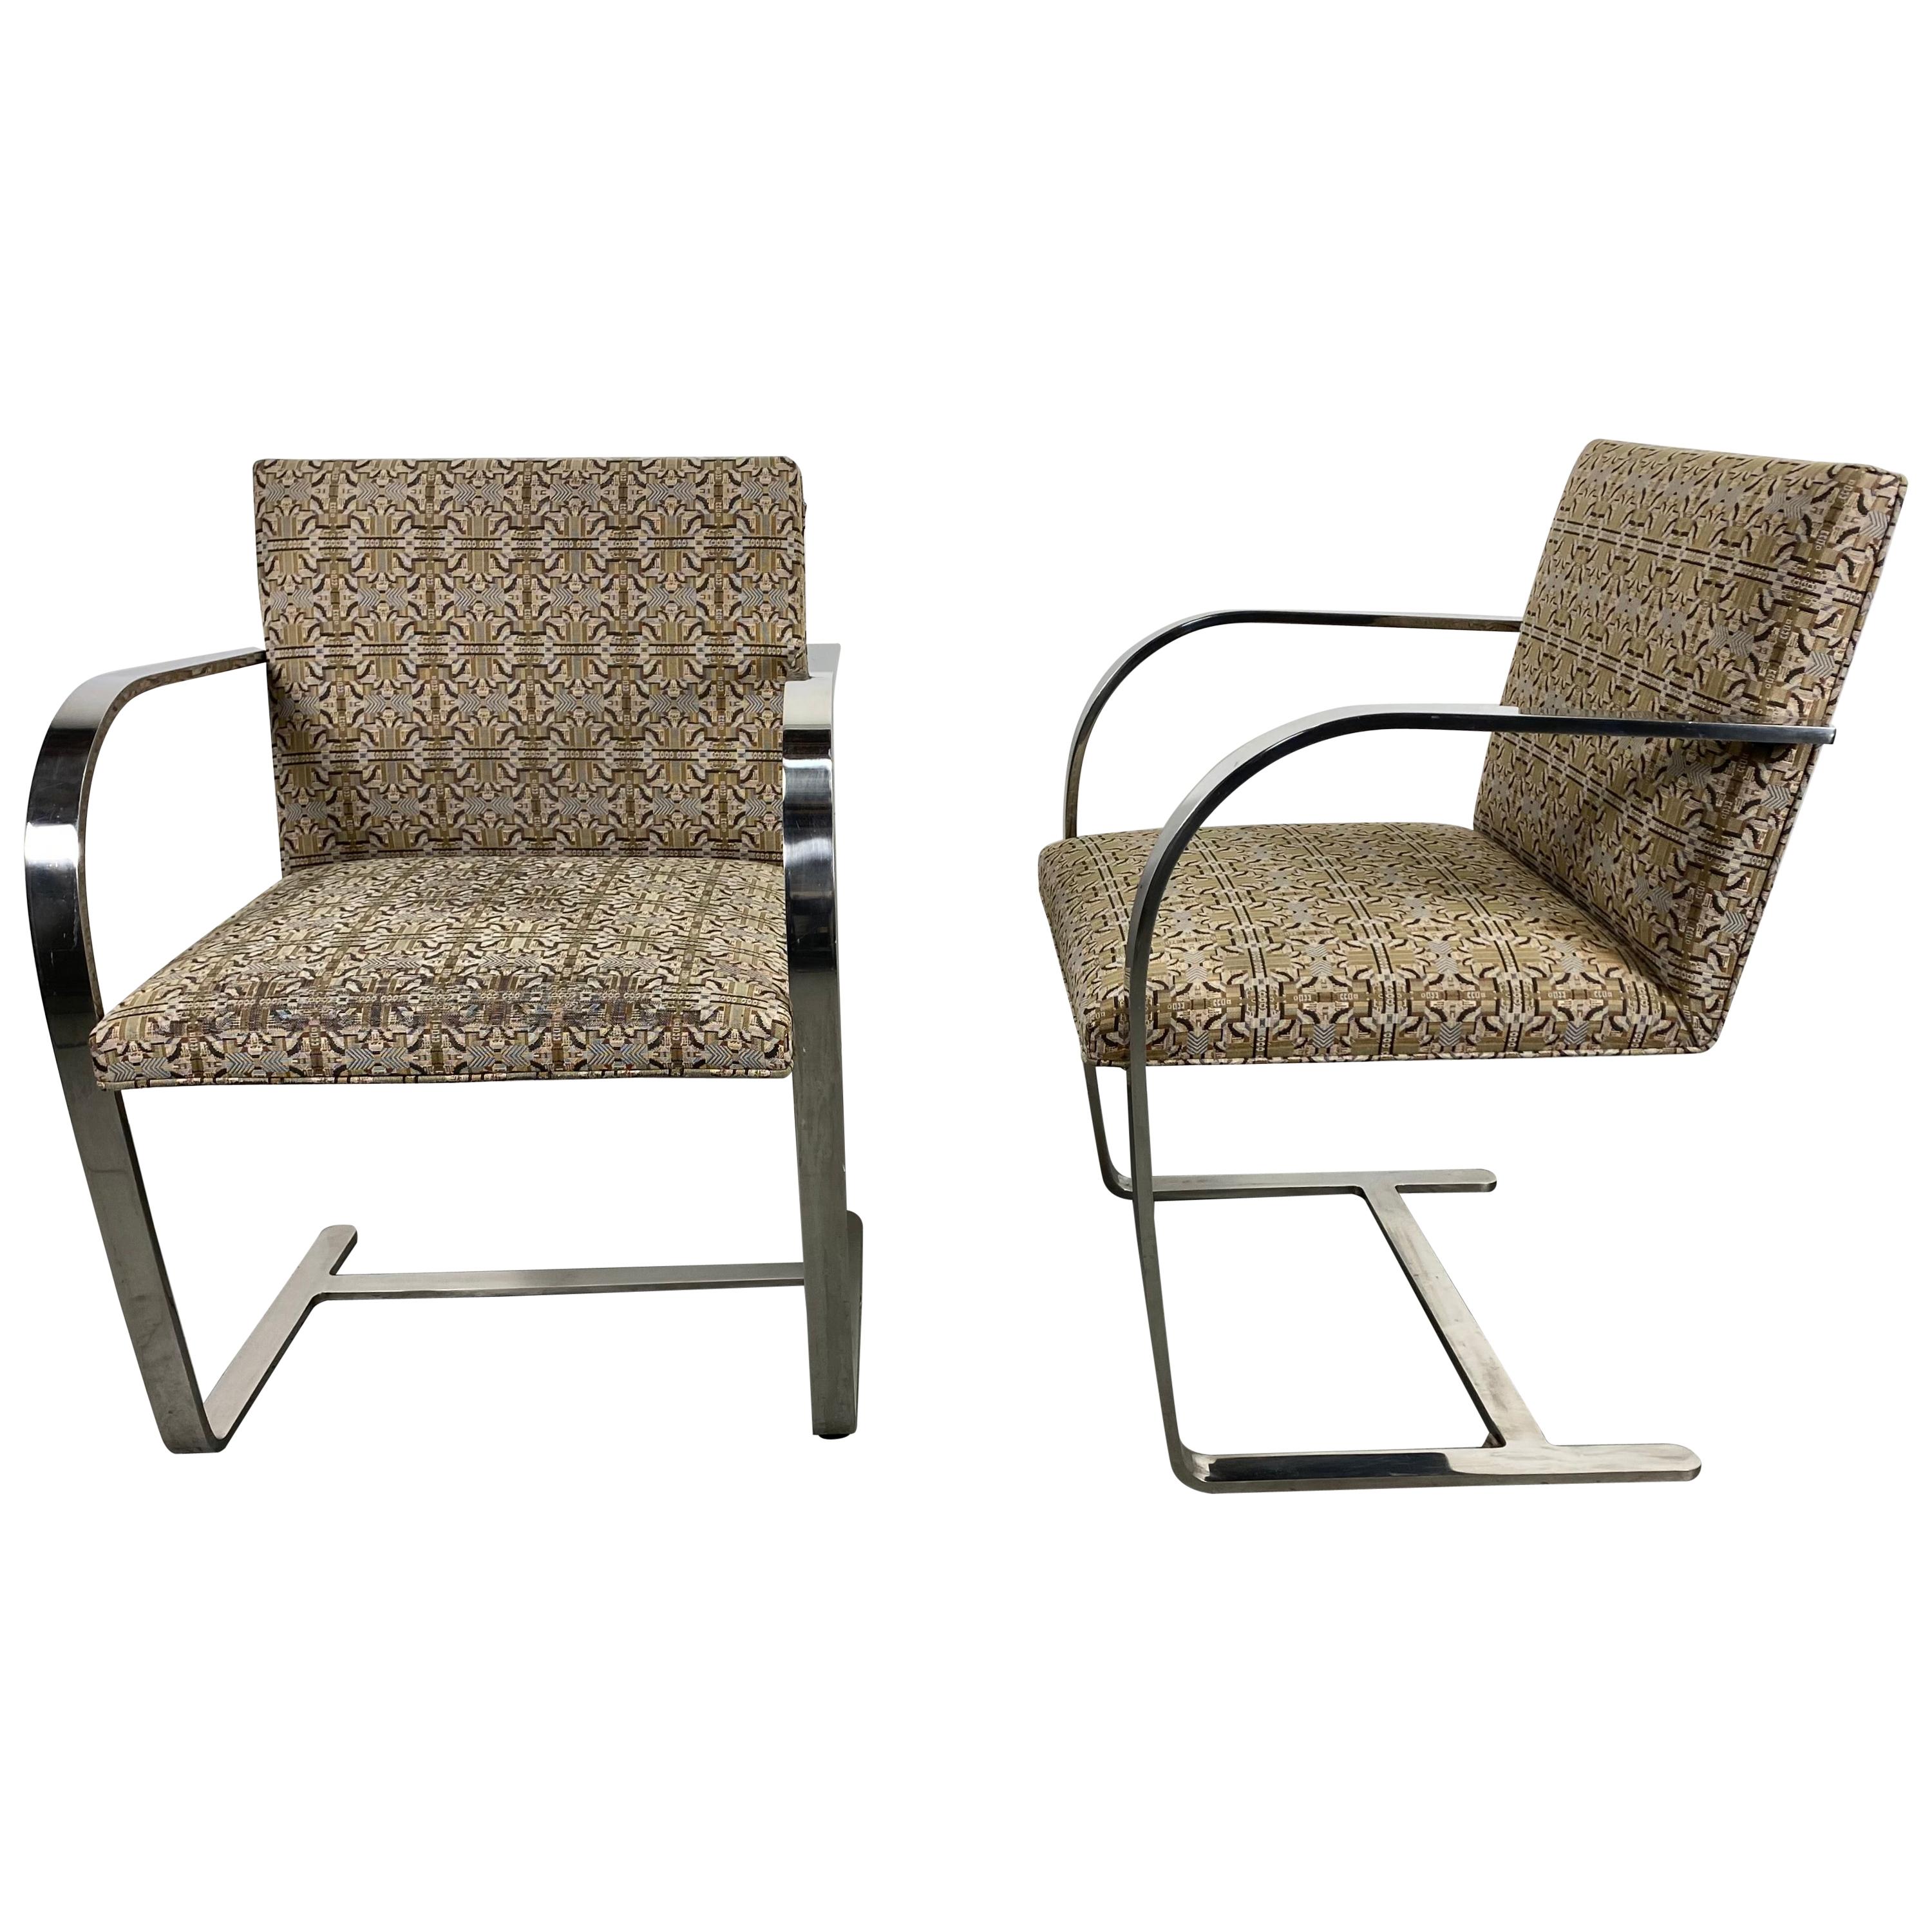 Classic Pair of Brno Chairs Designed by Mies Van Der Rohe for Knoll